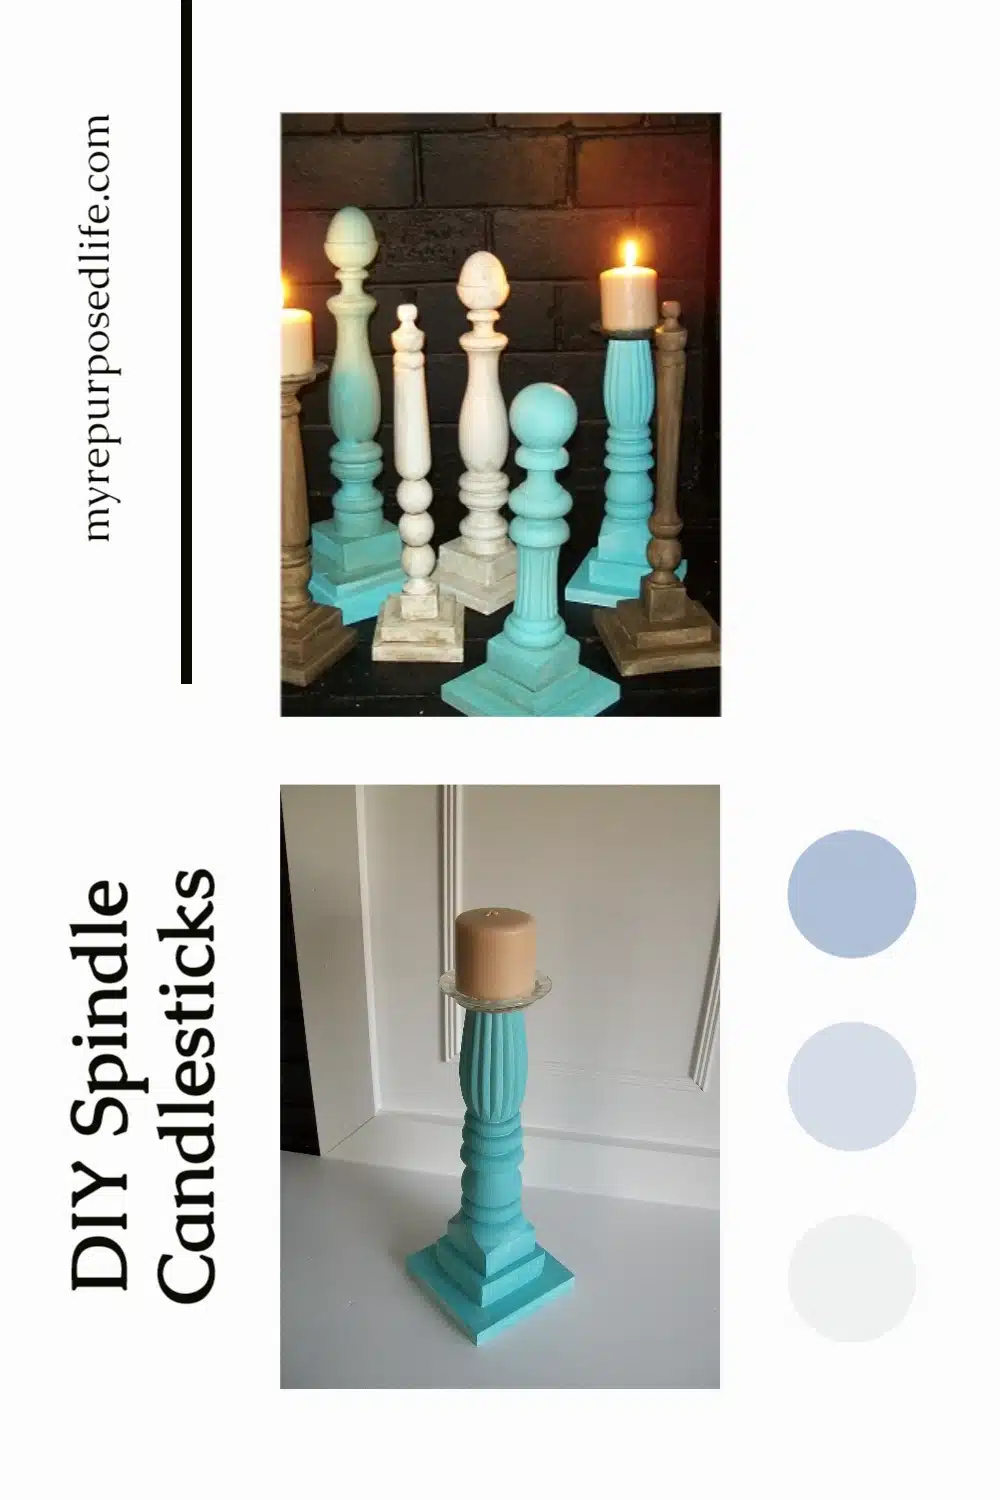 How to make fun and creative finials and wooden diy candlesticks out of old beds, chairs and more! #MyRepurposedLife #spindles #candlesticks #diy #project #easy via @repurposedlife